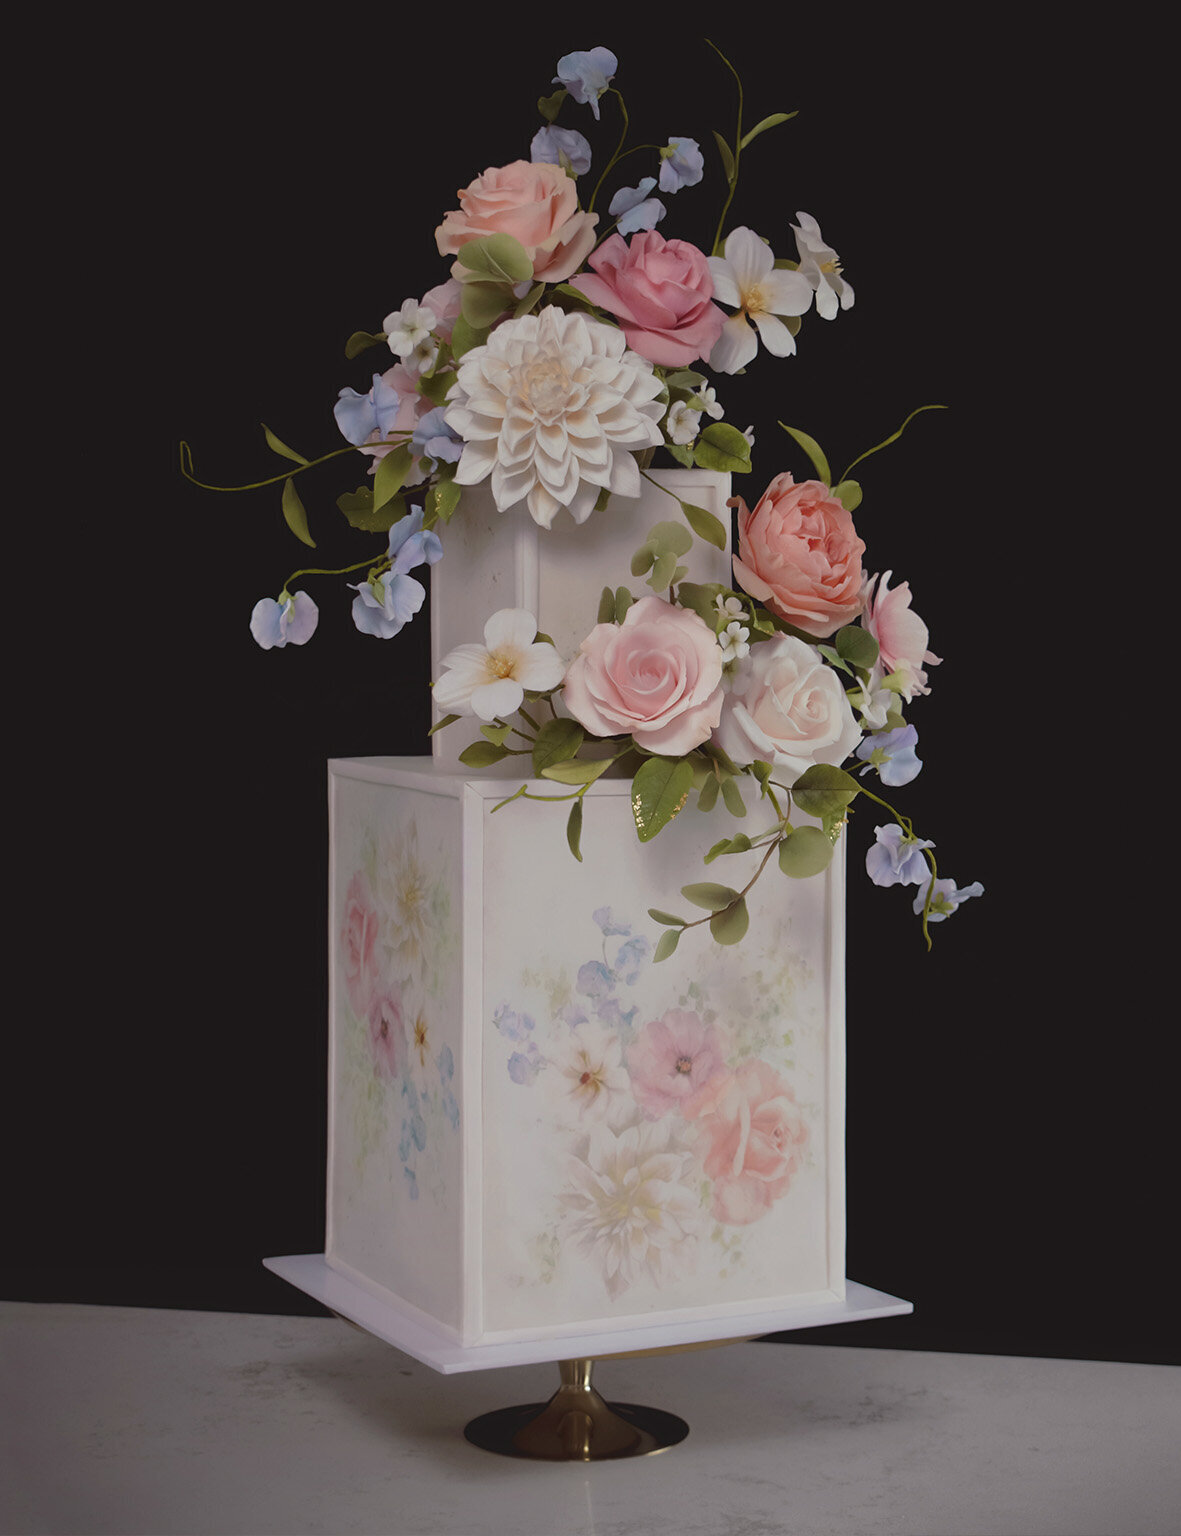 Tall Square Teo Tier Wedding Cake With Spring Pastel Sugar Flowers